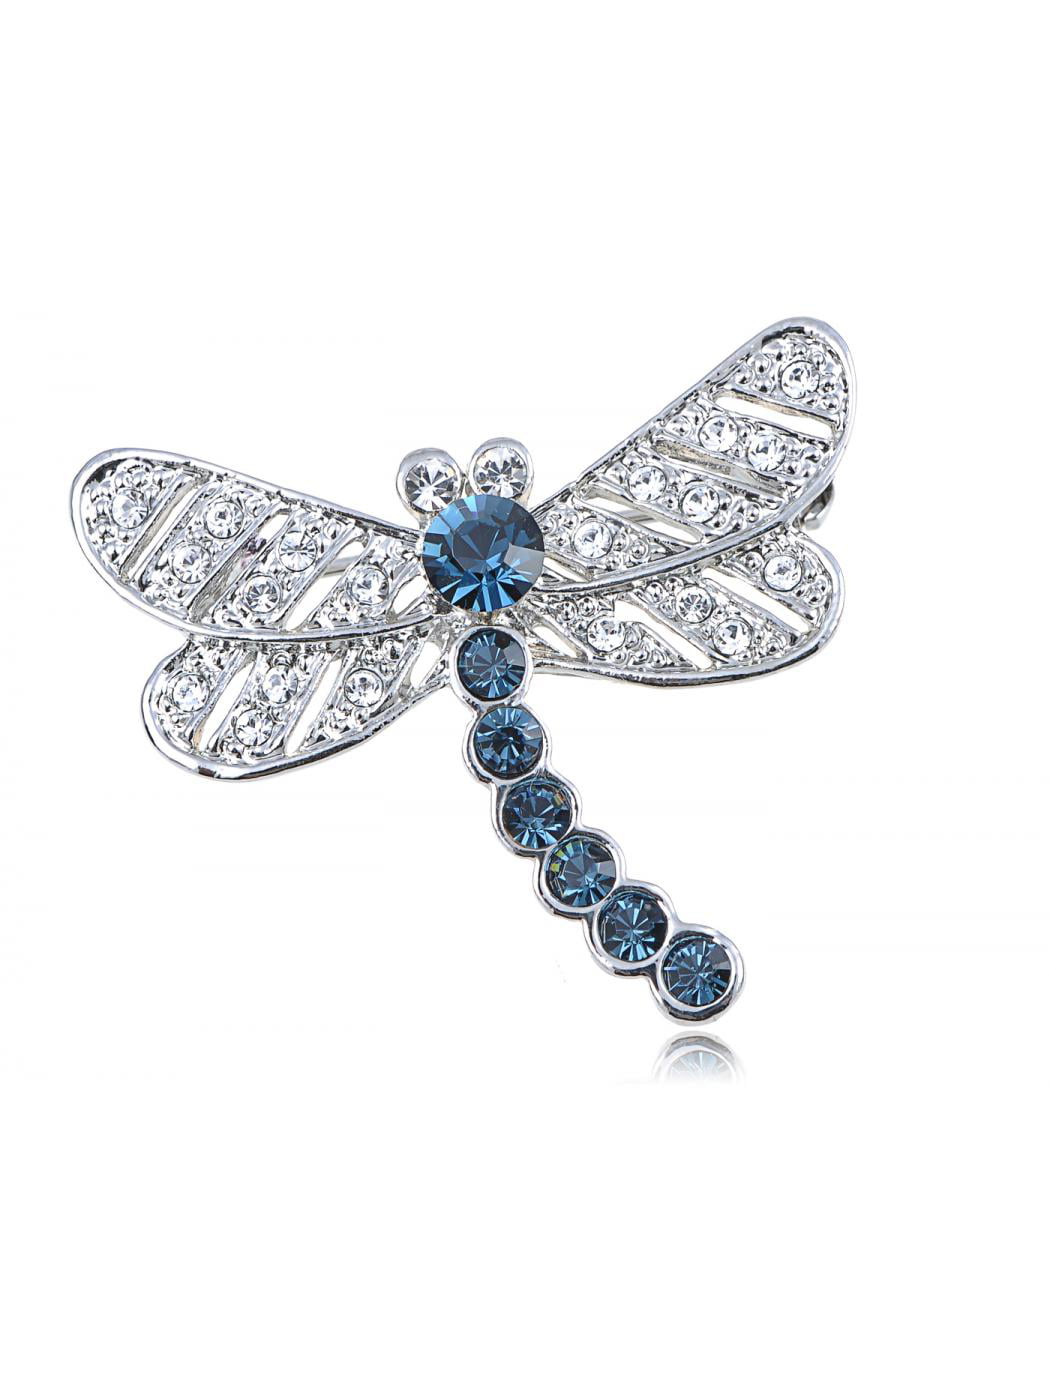 Alilang Beautiful Clear Blue Crystal Rhinestone Dragonfly Insect Bracelet Bangle Cuff 